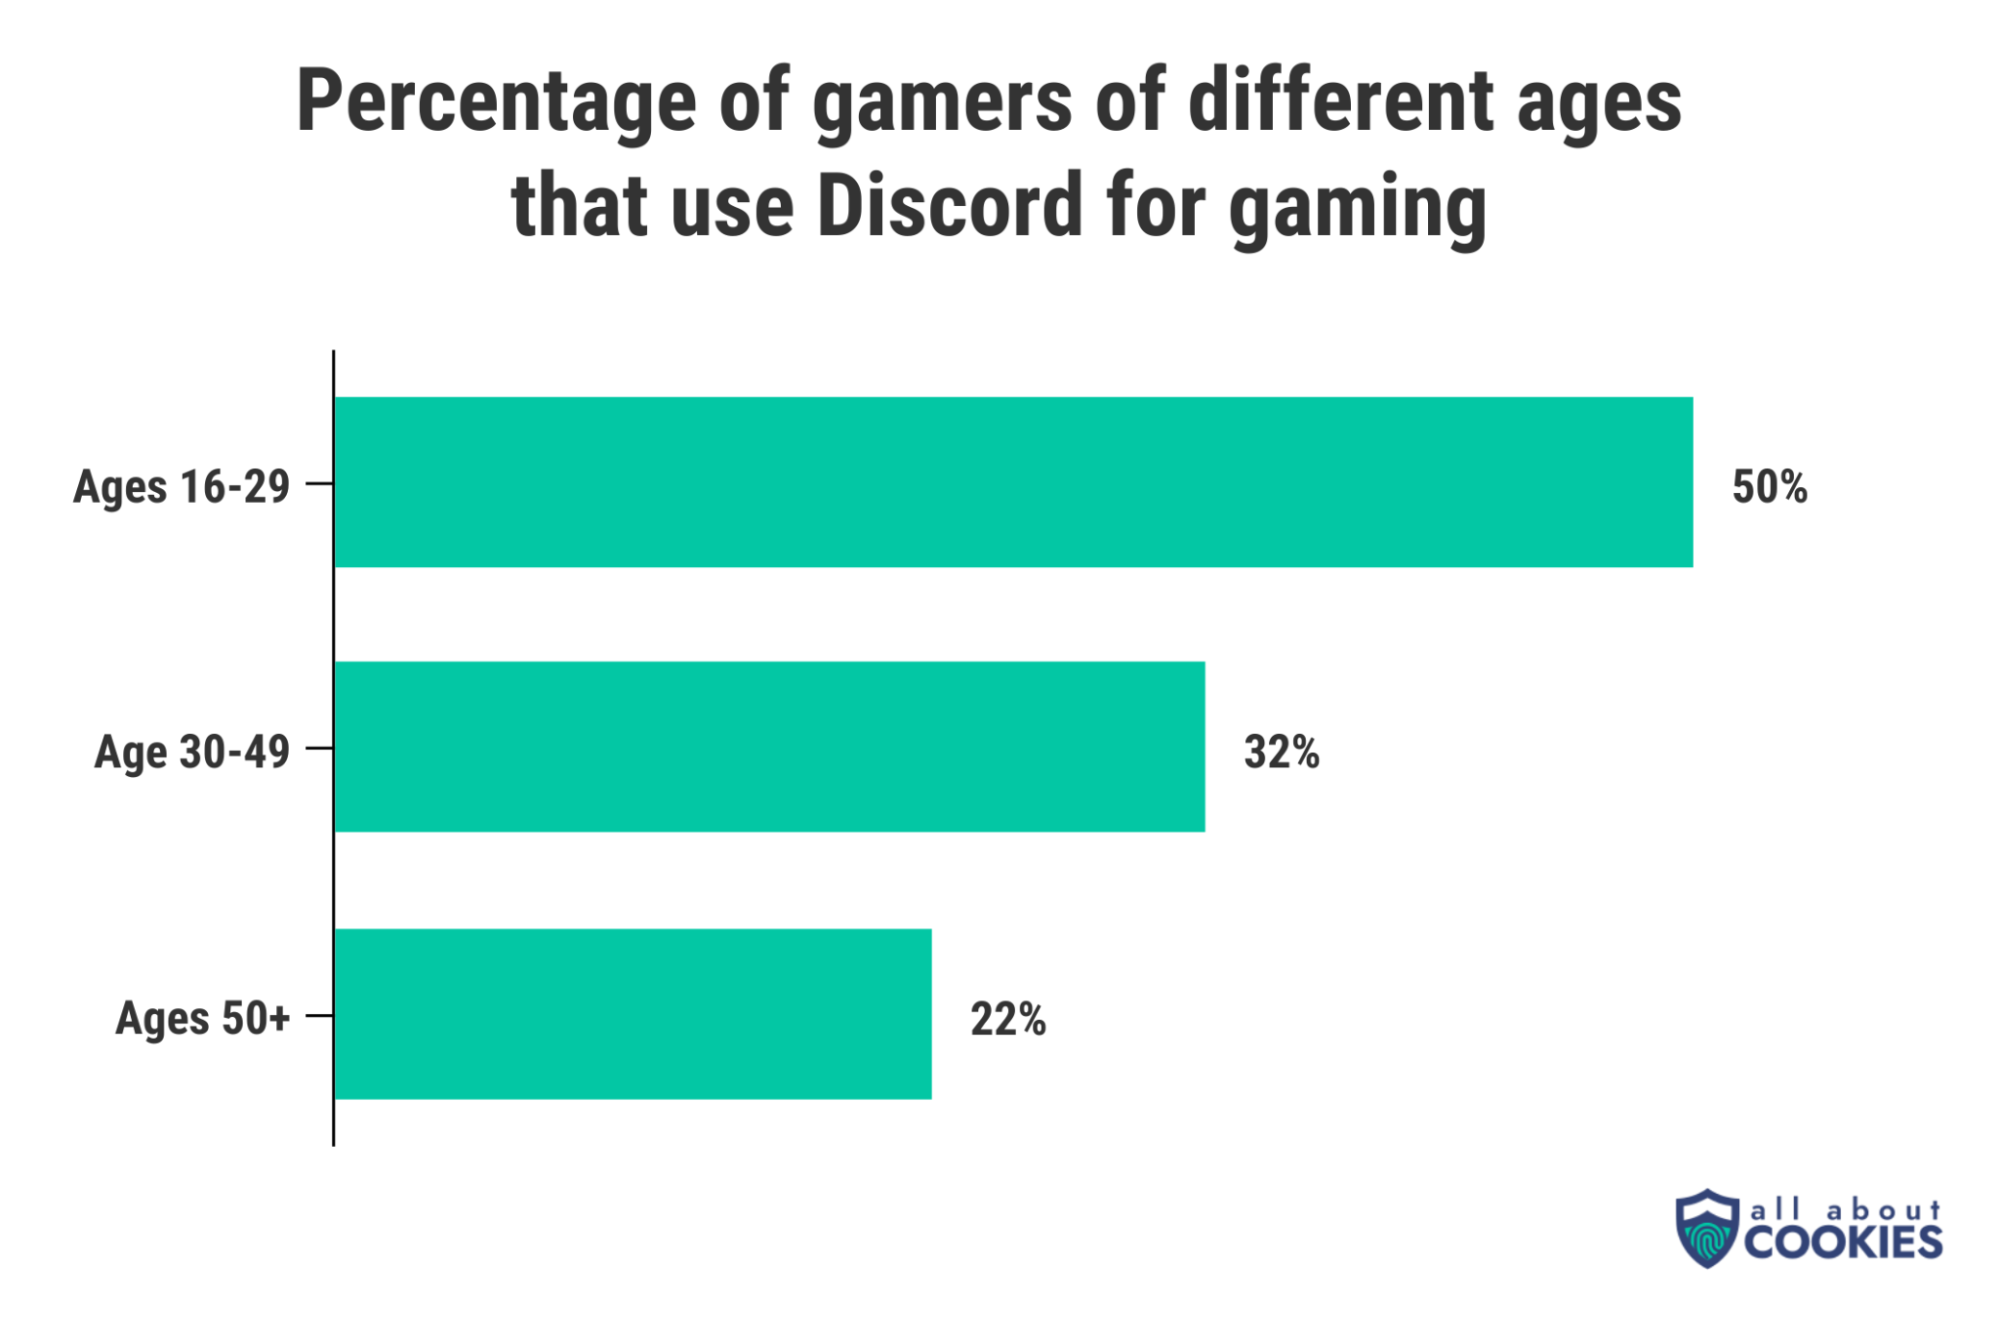 Discord is used by 50% of gamers ages 16-29.